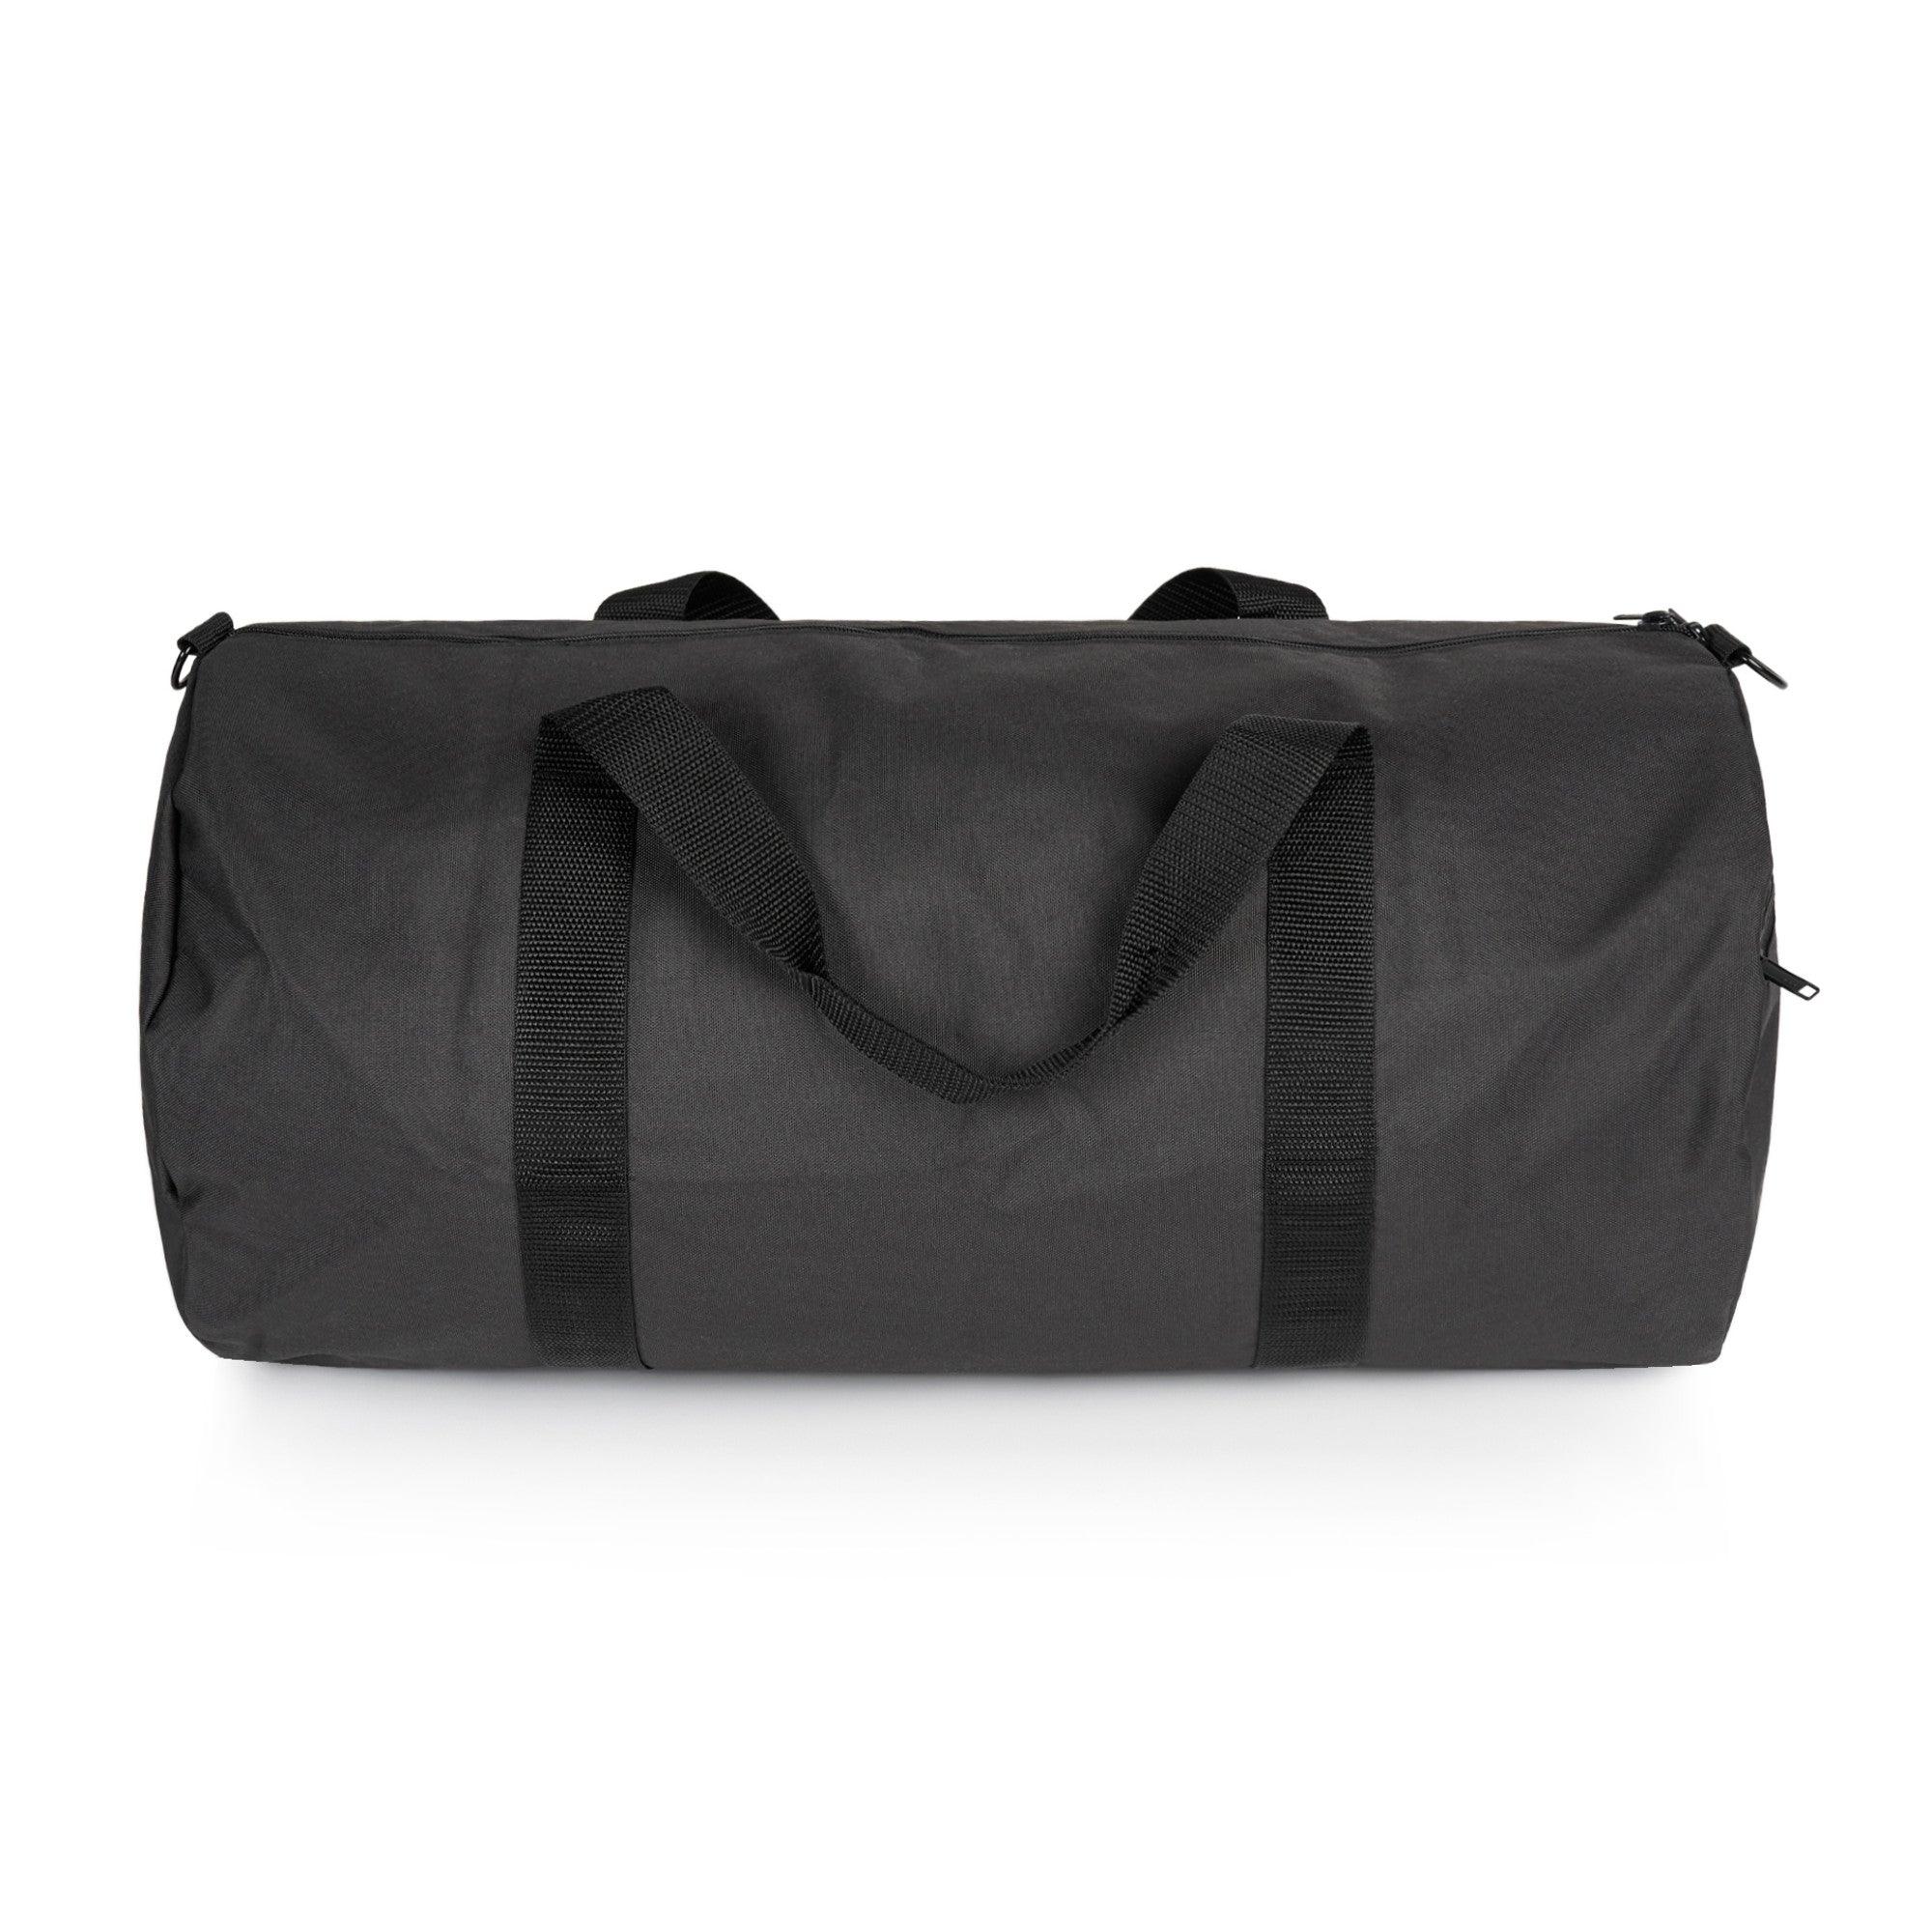 Contrast Duffel Bag - 1020 - Colortex Screen Printing & Embroidery